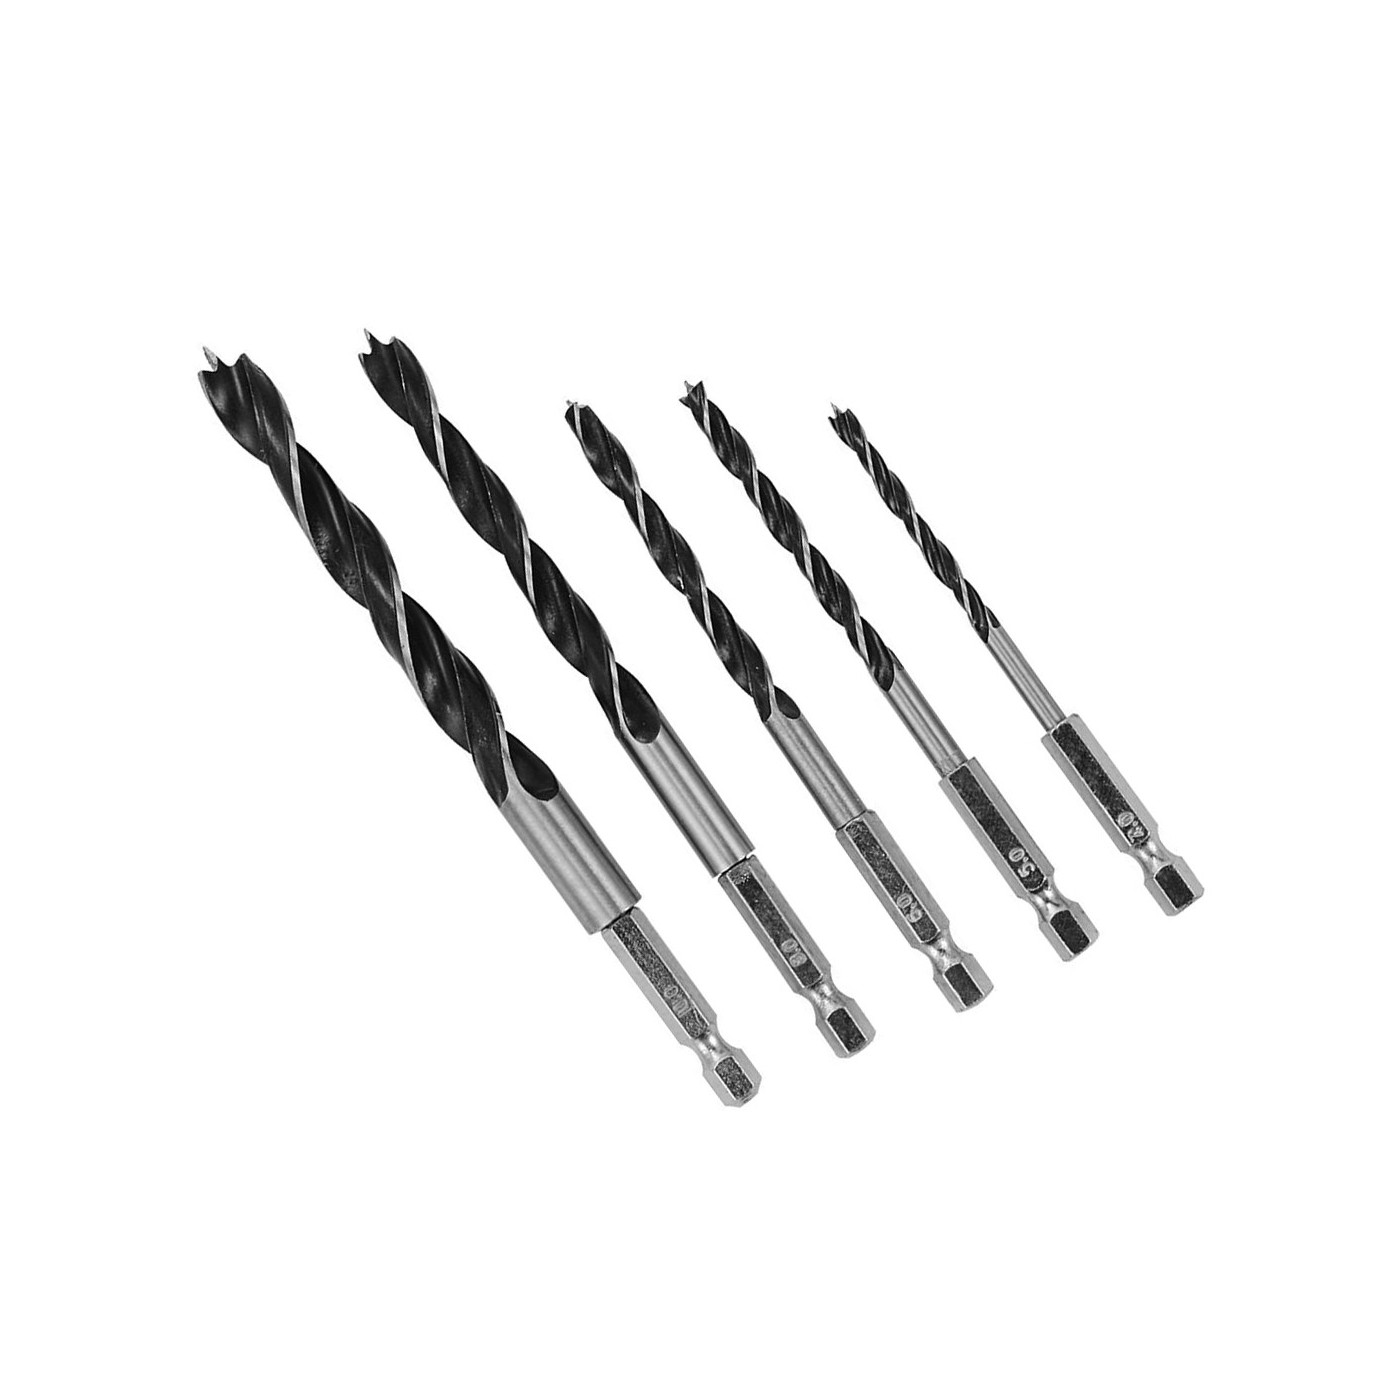 Set of 5 wood drill bits (4,5,6,8,10 mm with hex shank)